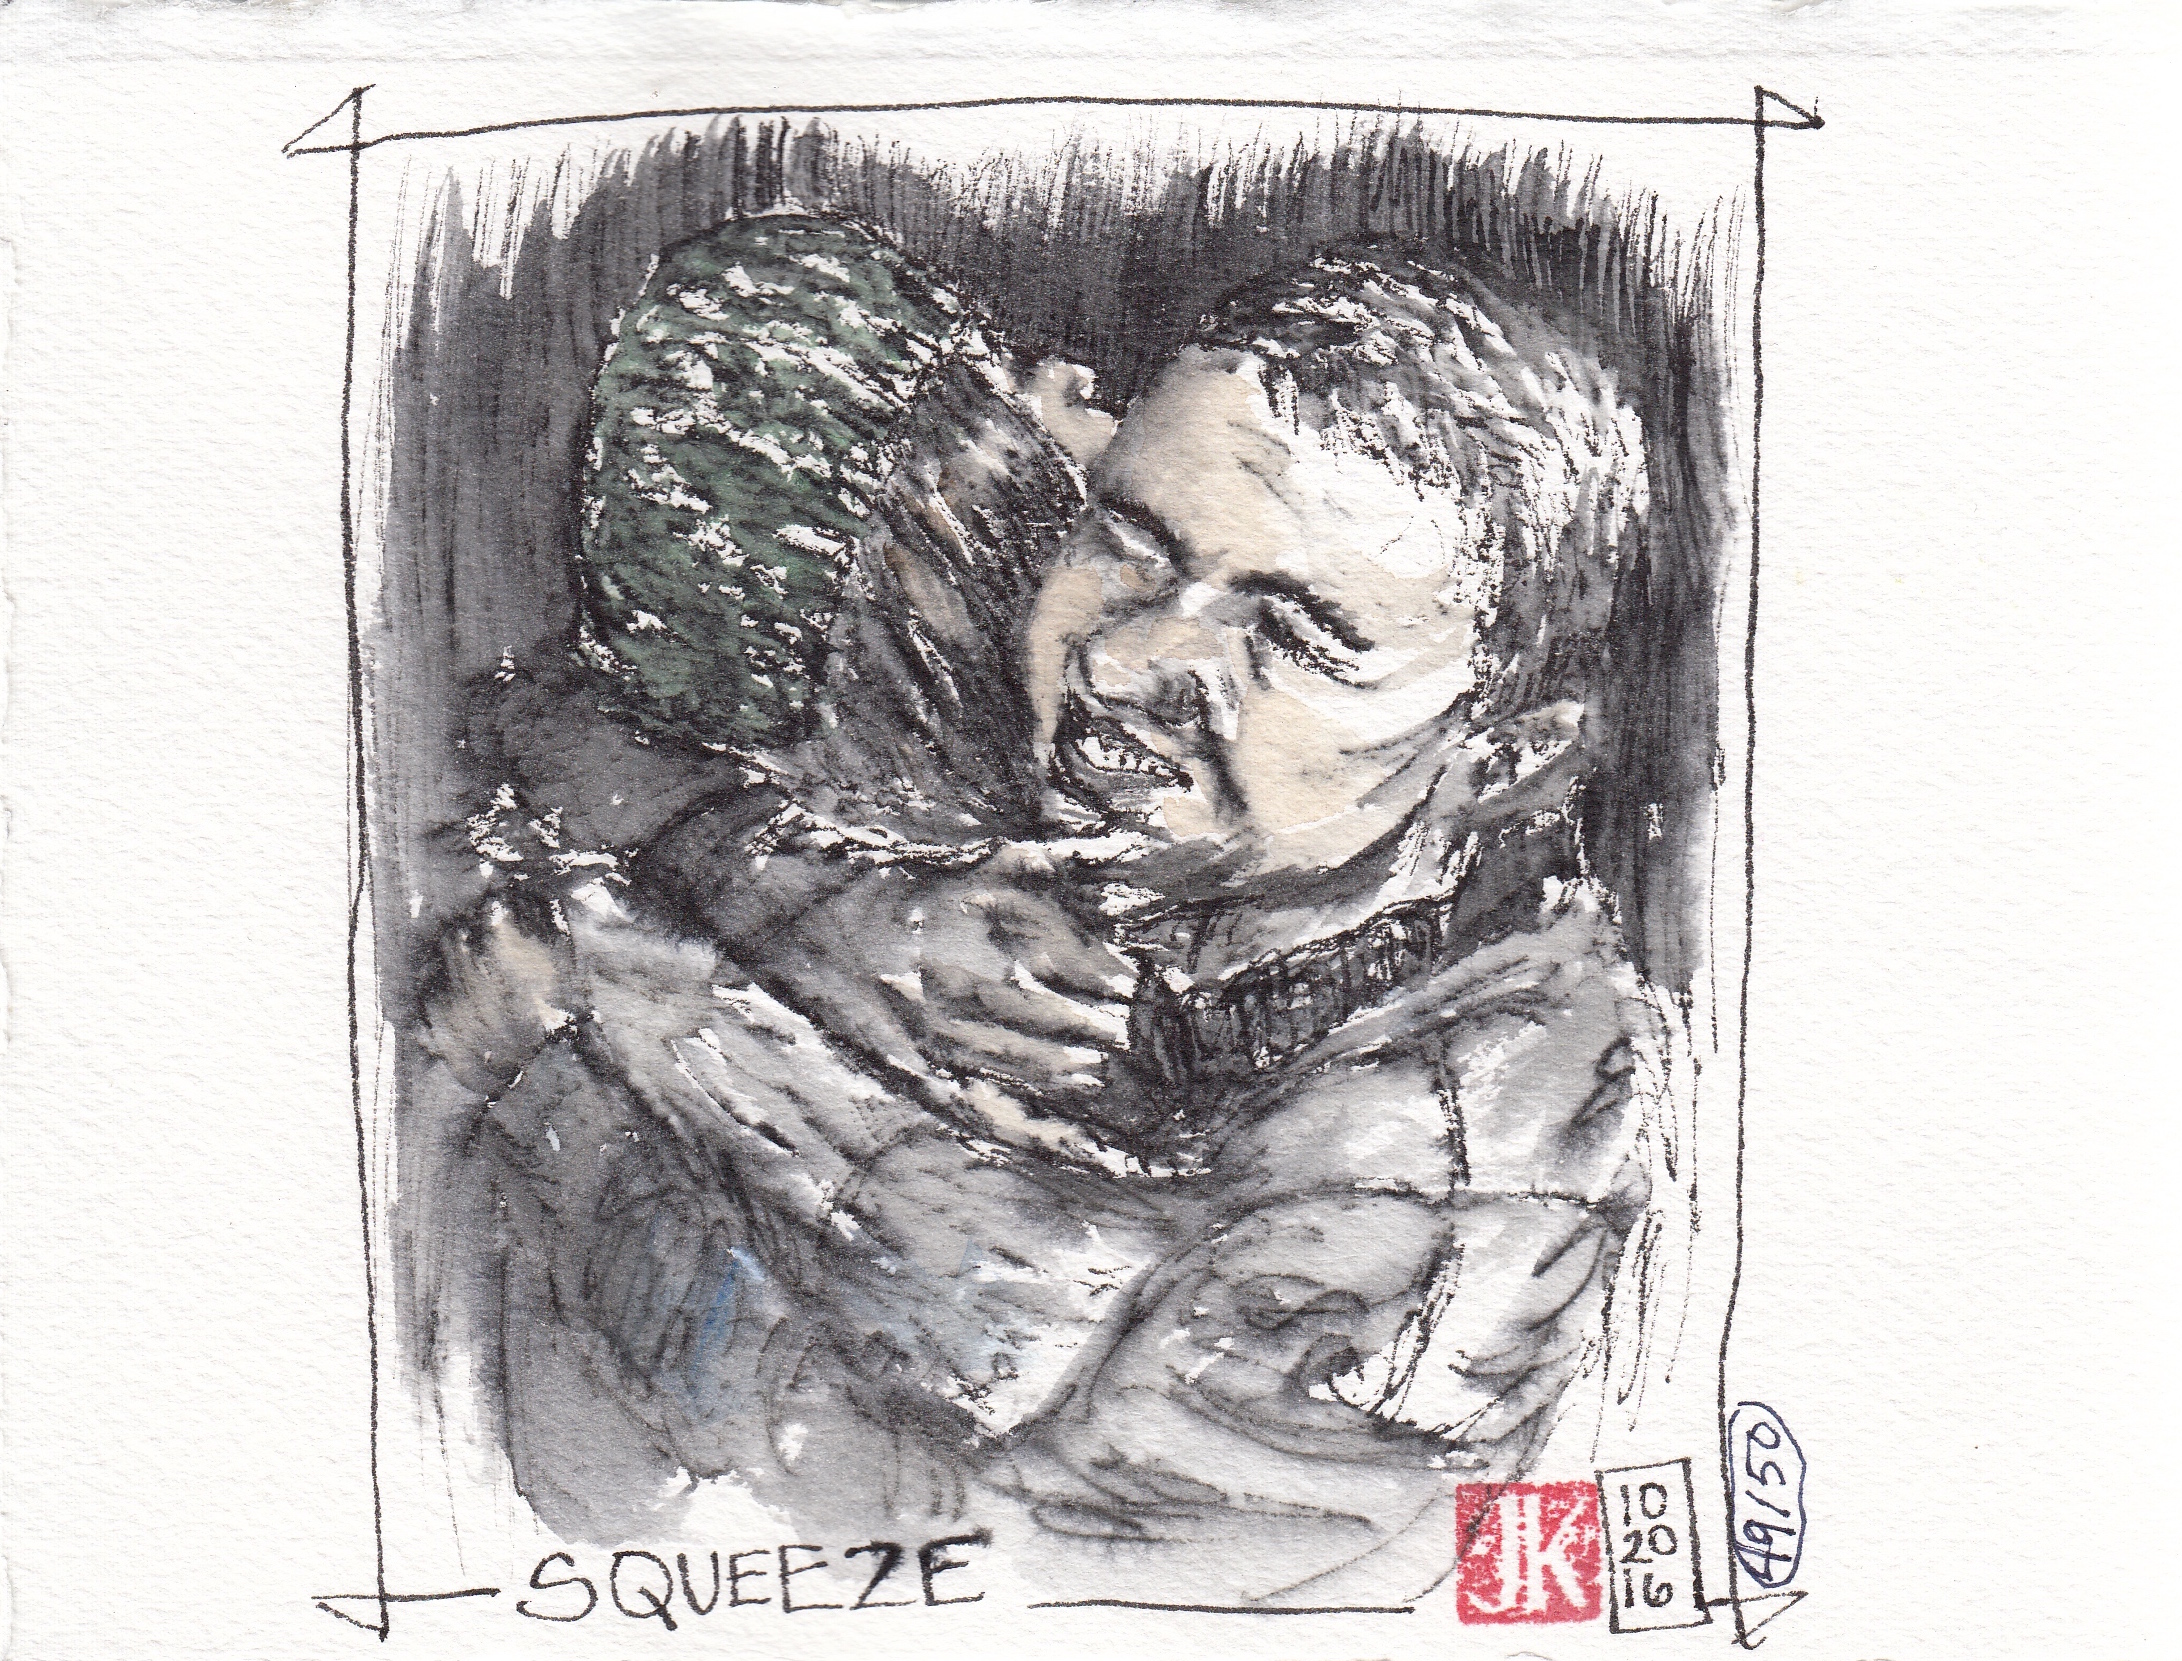 Day 20 - Squeeze